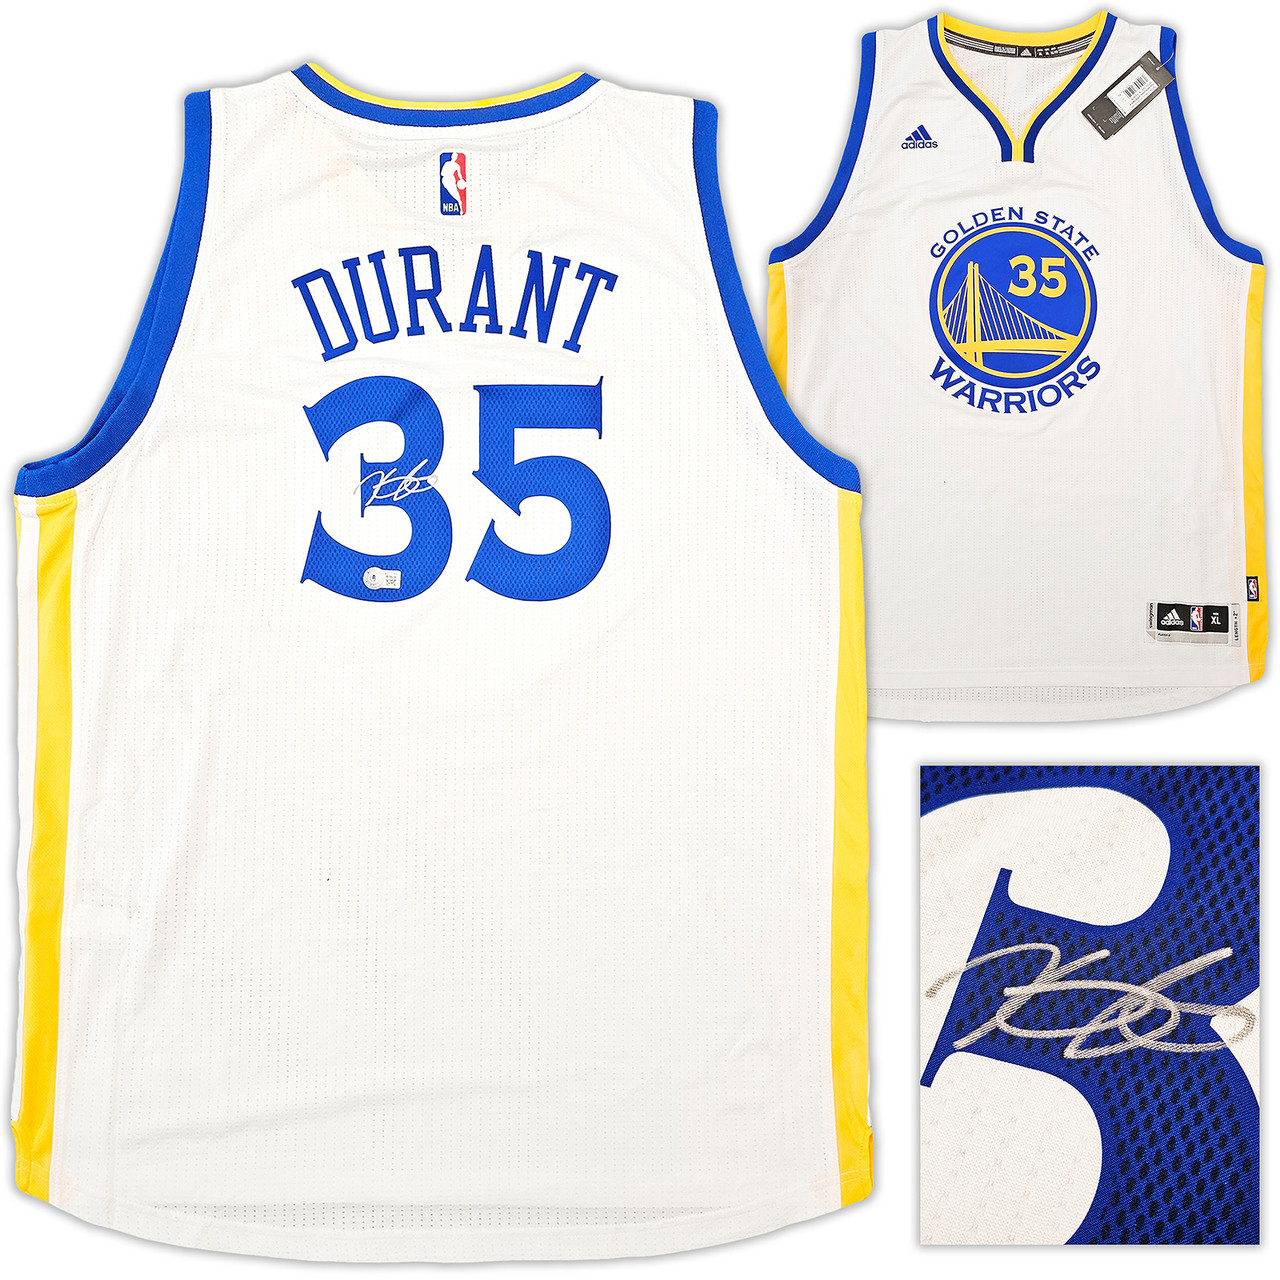 Kevin Durant Signed LE Golden State Warriors Nike Jersey Inscribed